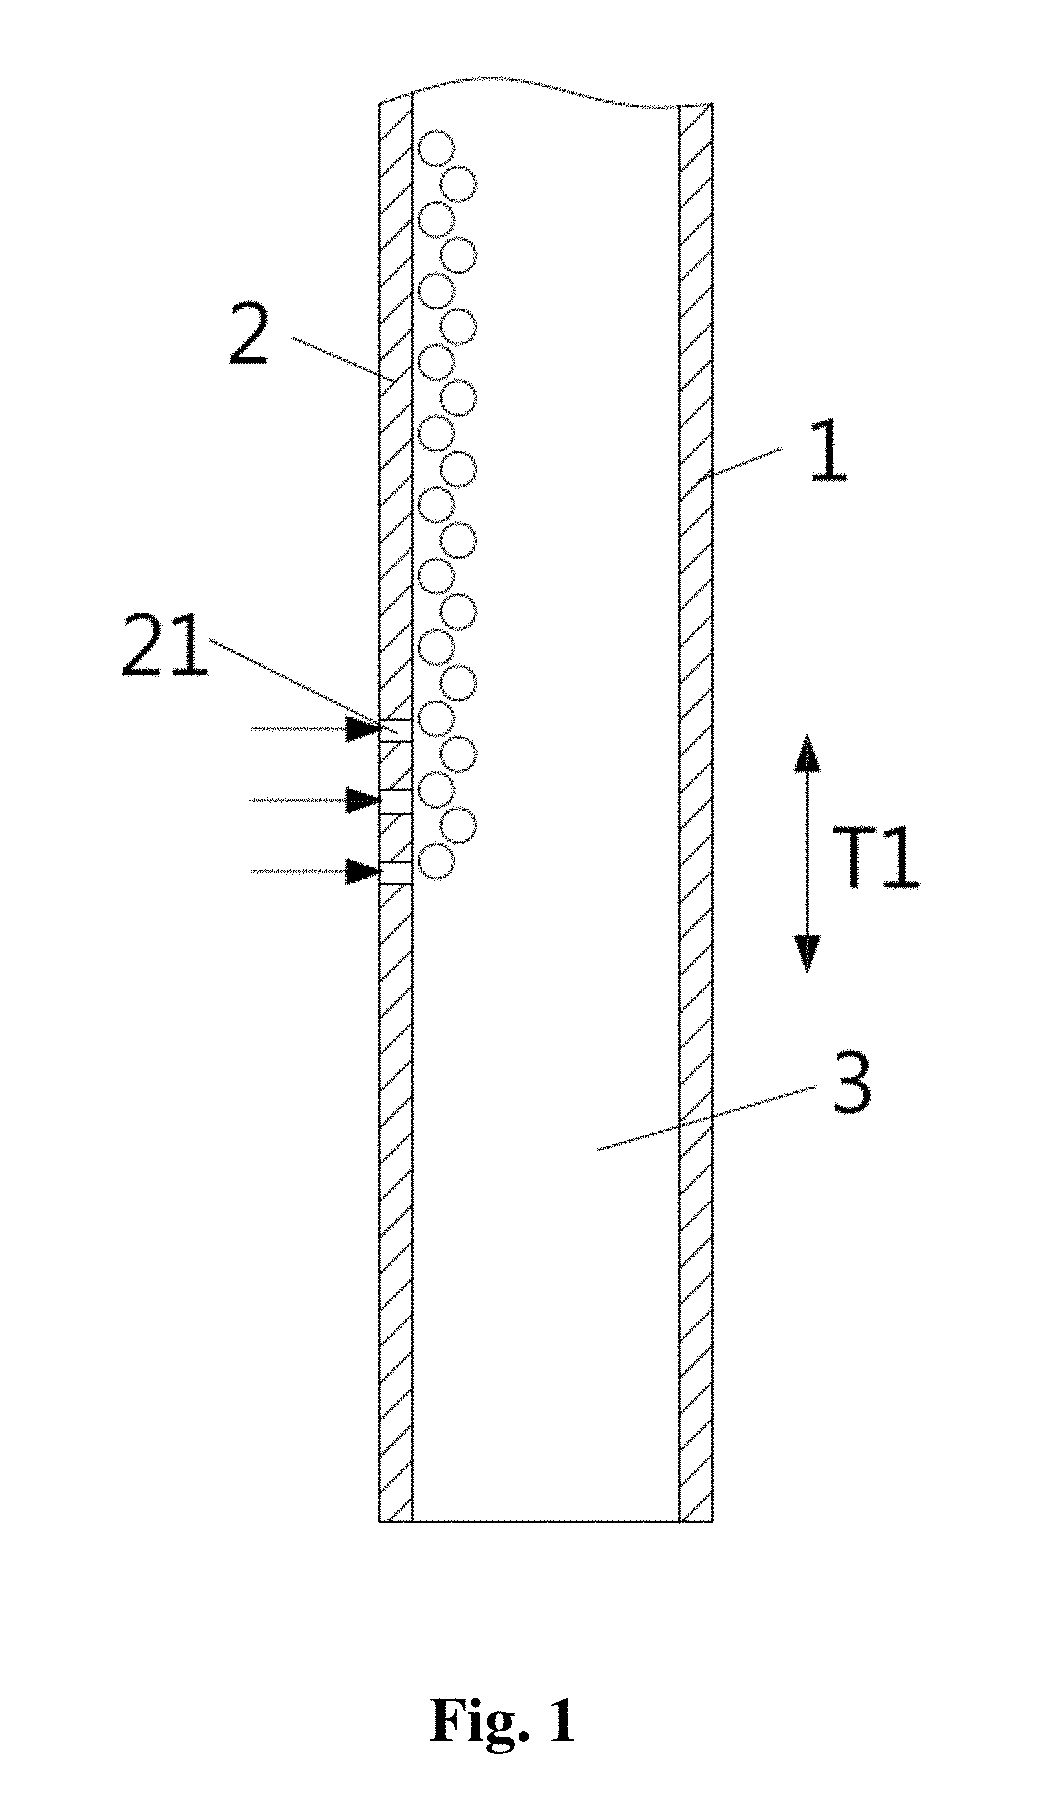 Method and apparatus of generating substantially monodisperse droplets